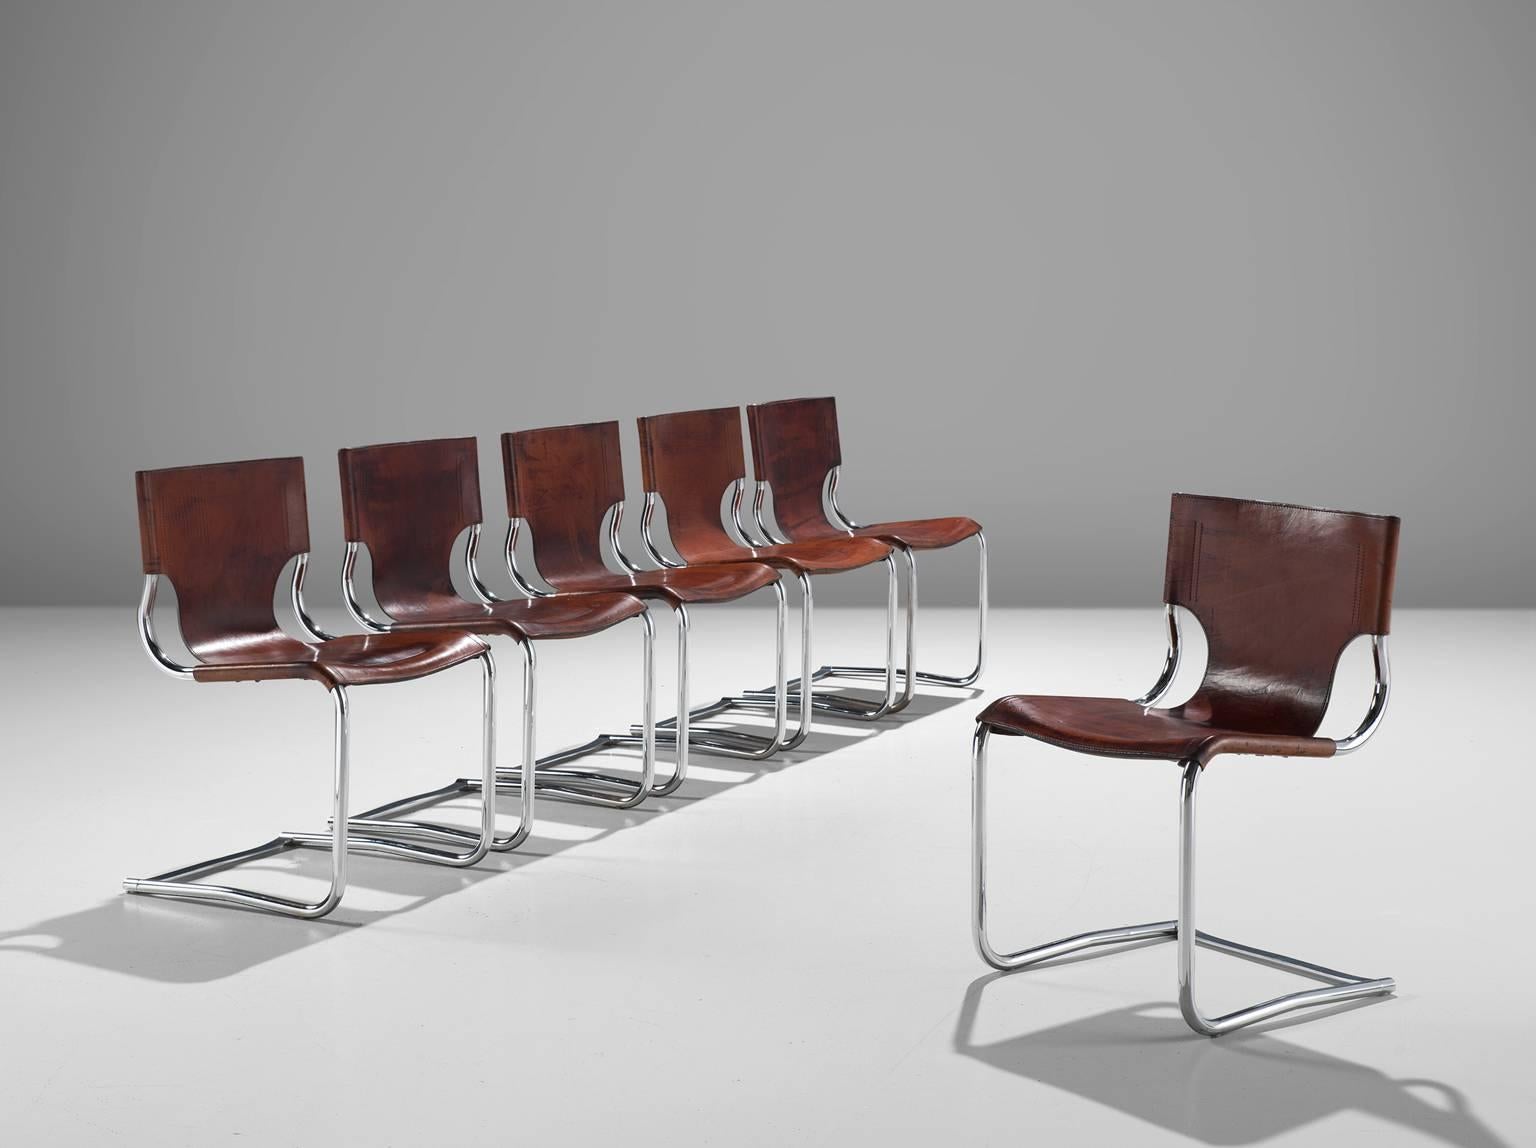 Carlo Bartoli, set of six dining chairs '920', leather and steel, Italy, 1971.

This elegant set of cantilevered tubular frame chairs are executed with the finest brown leather that is used as a shell for both seat and back. The sides of the chair